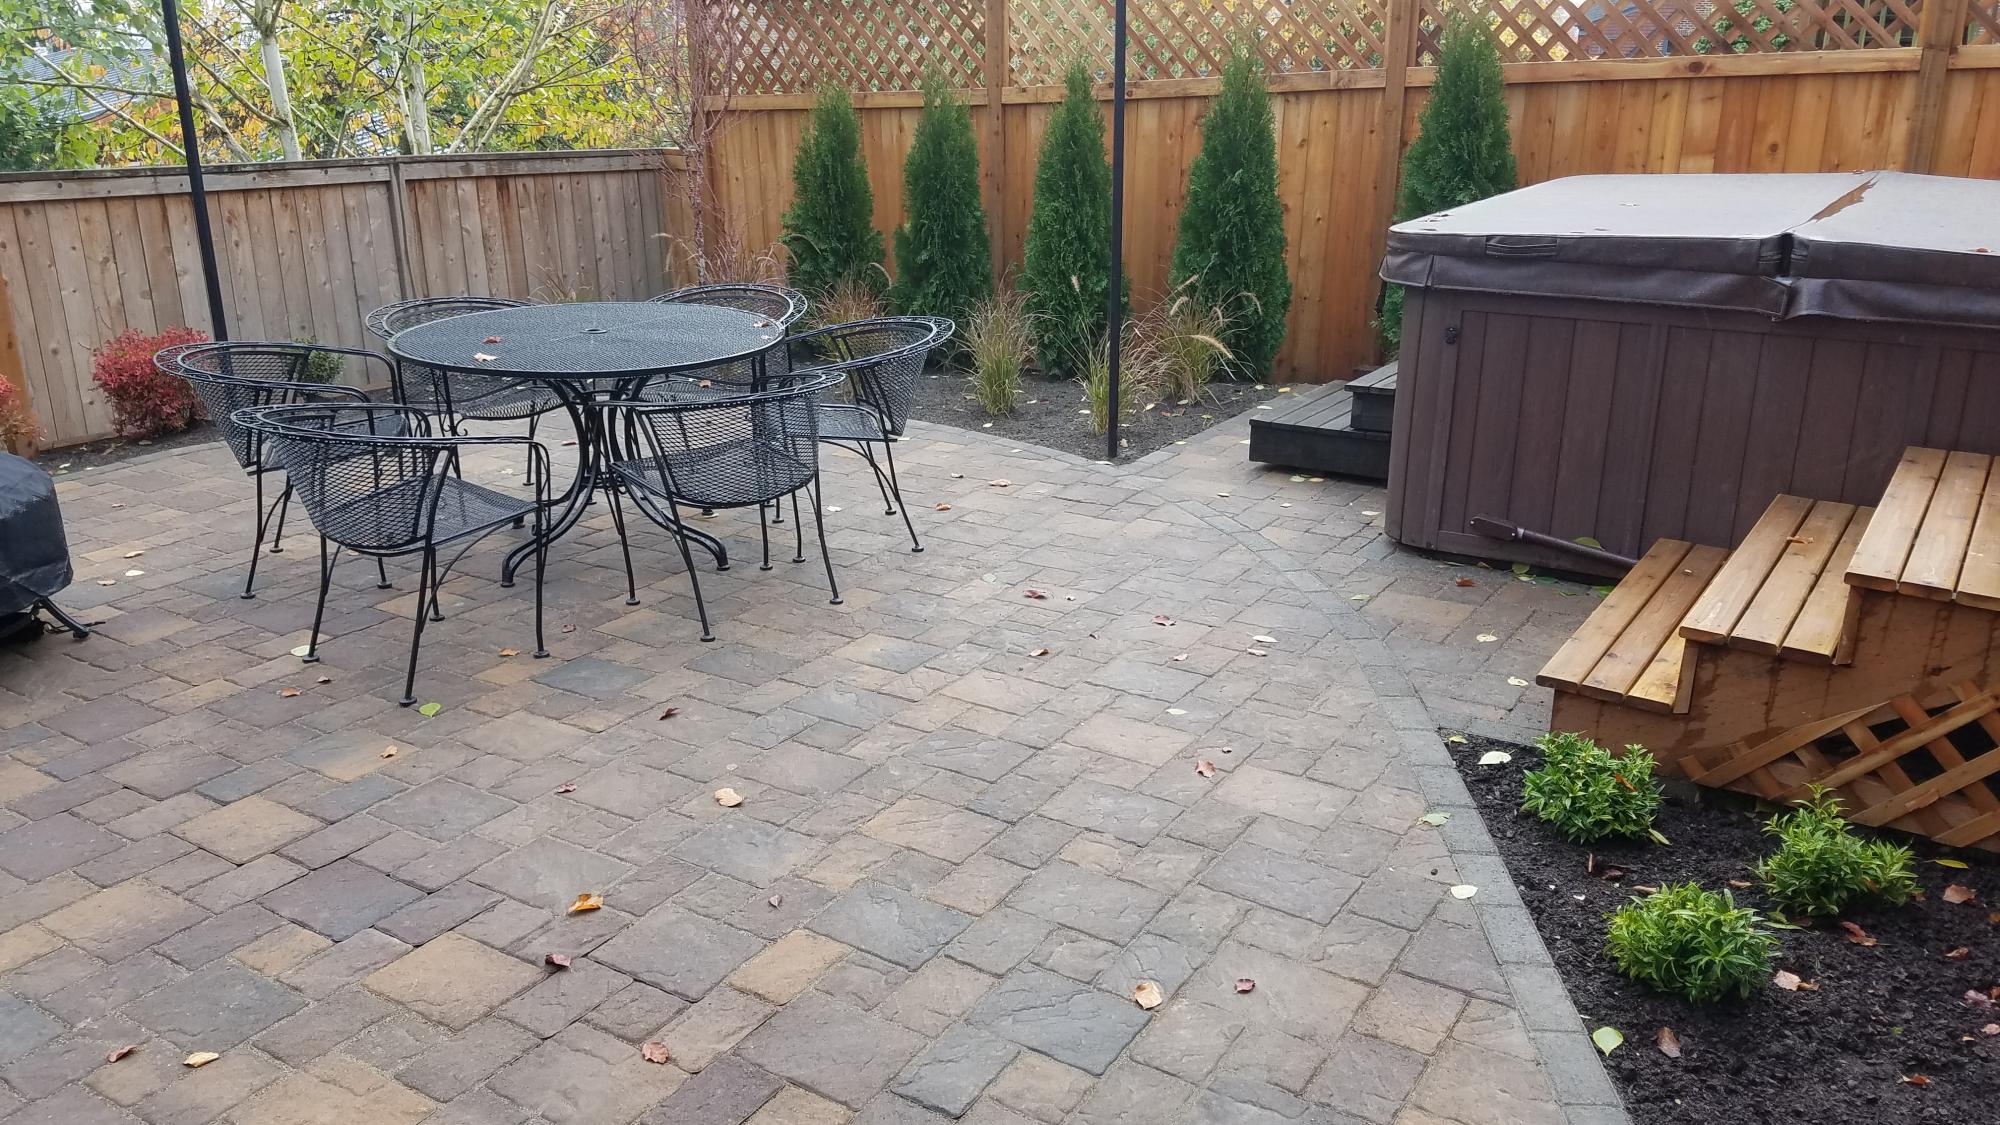 What are the pricing & rates for quality Paver Work?